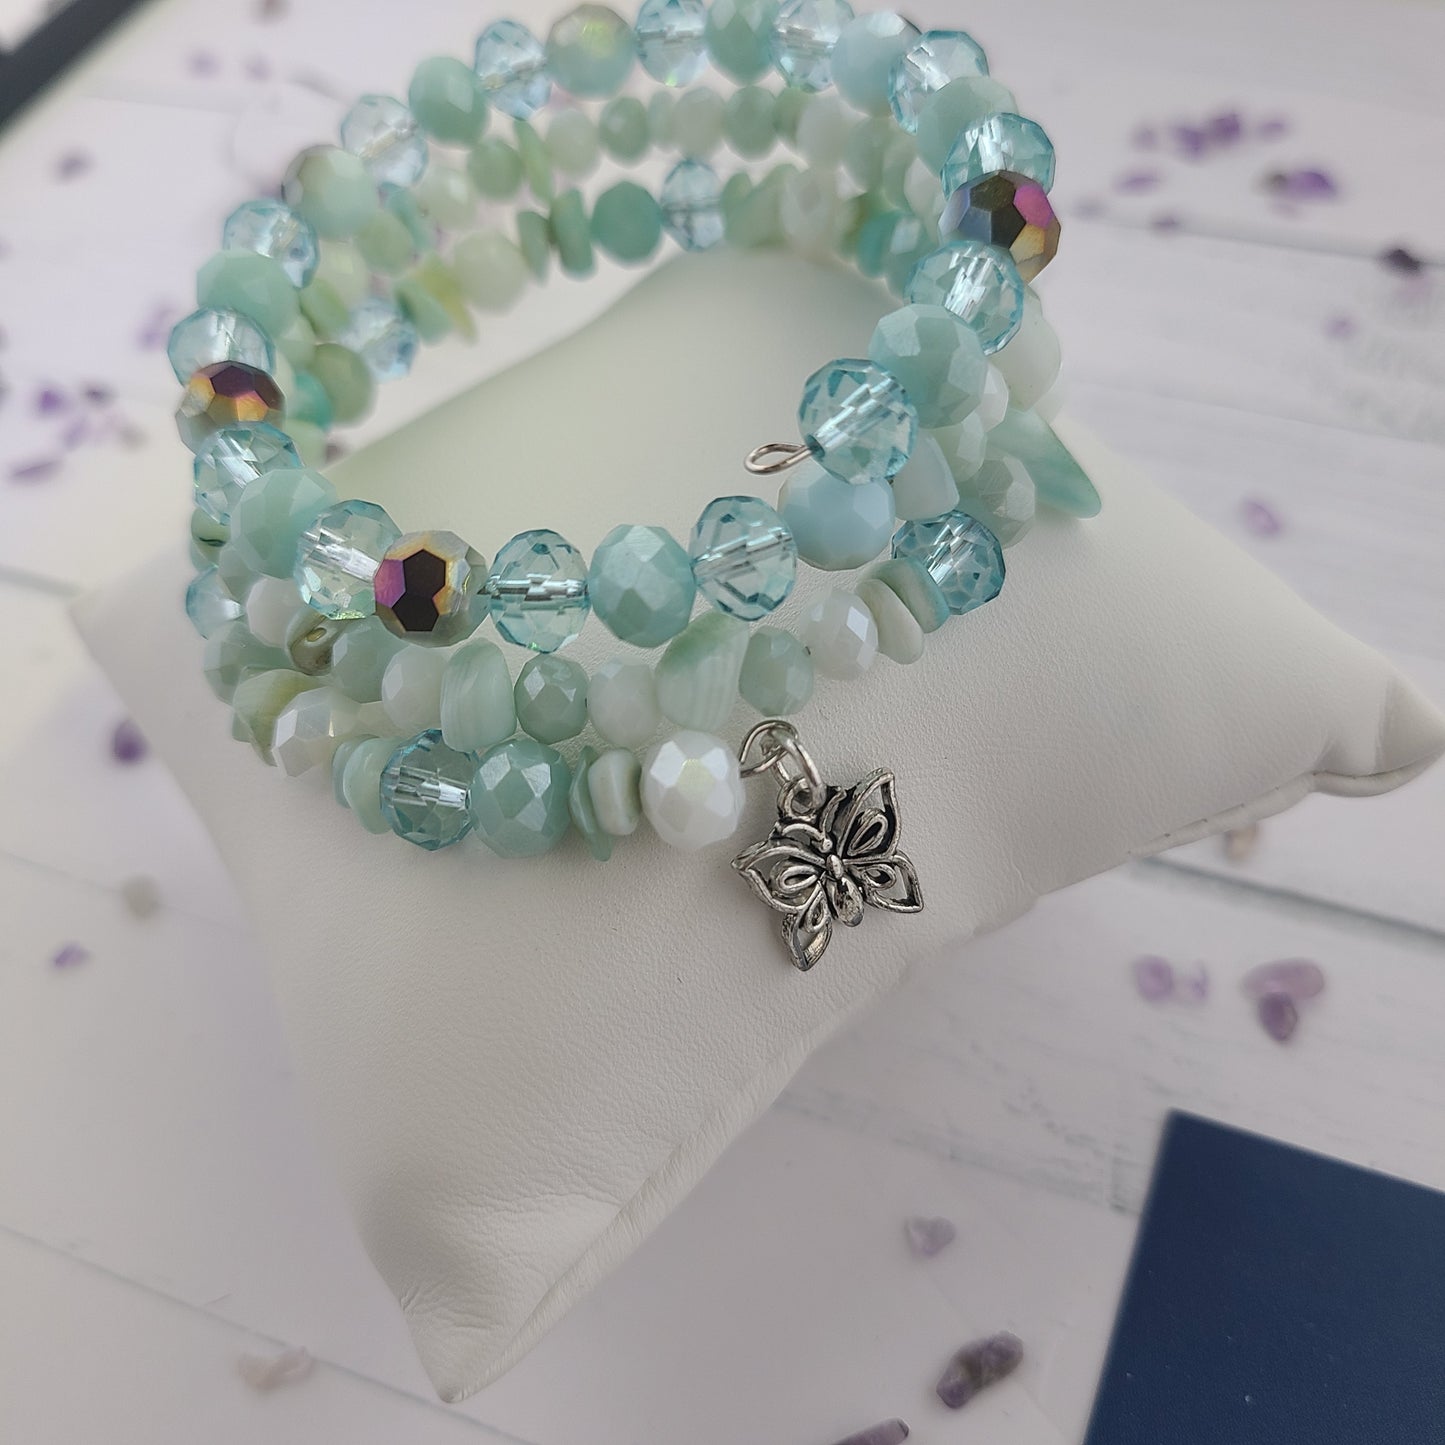 Handmade Teal, Aqua Blue Glass Memory Wire Wrap Beaded Bracelet with Silver Butterfly Charm.